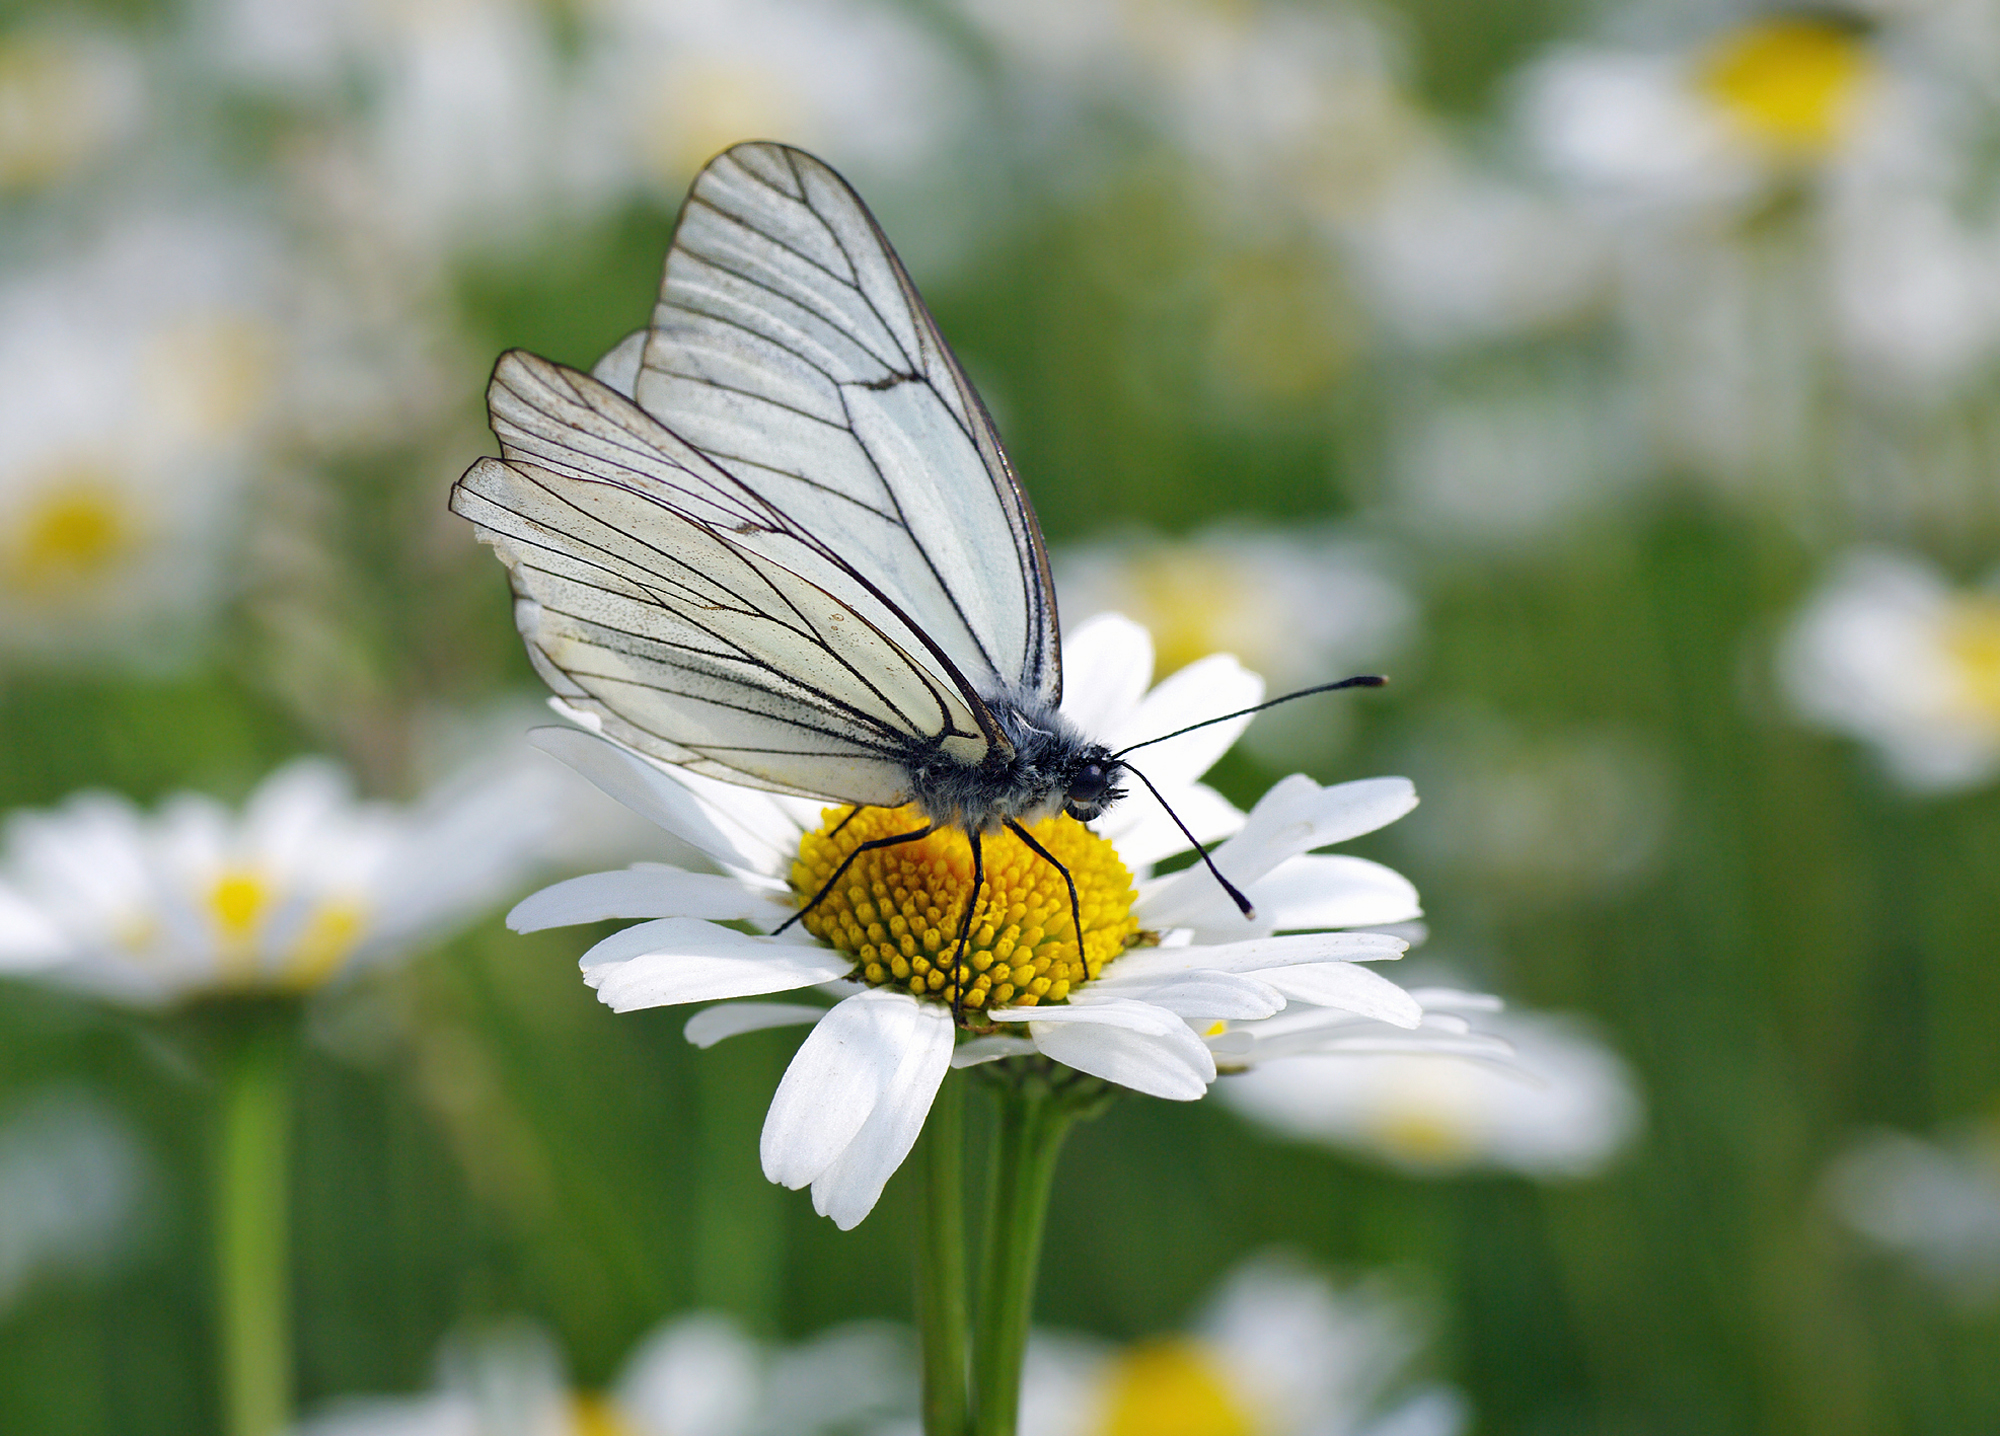 Aporia crataegi, the Black-veined white on an Oxeye daisy by Christian Fischer